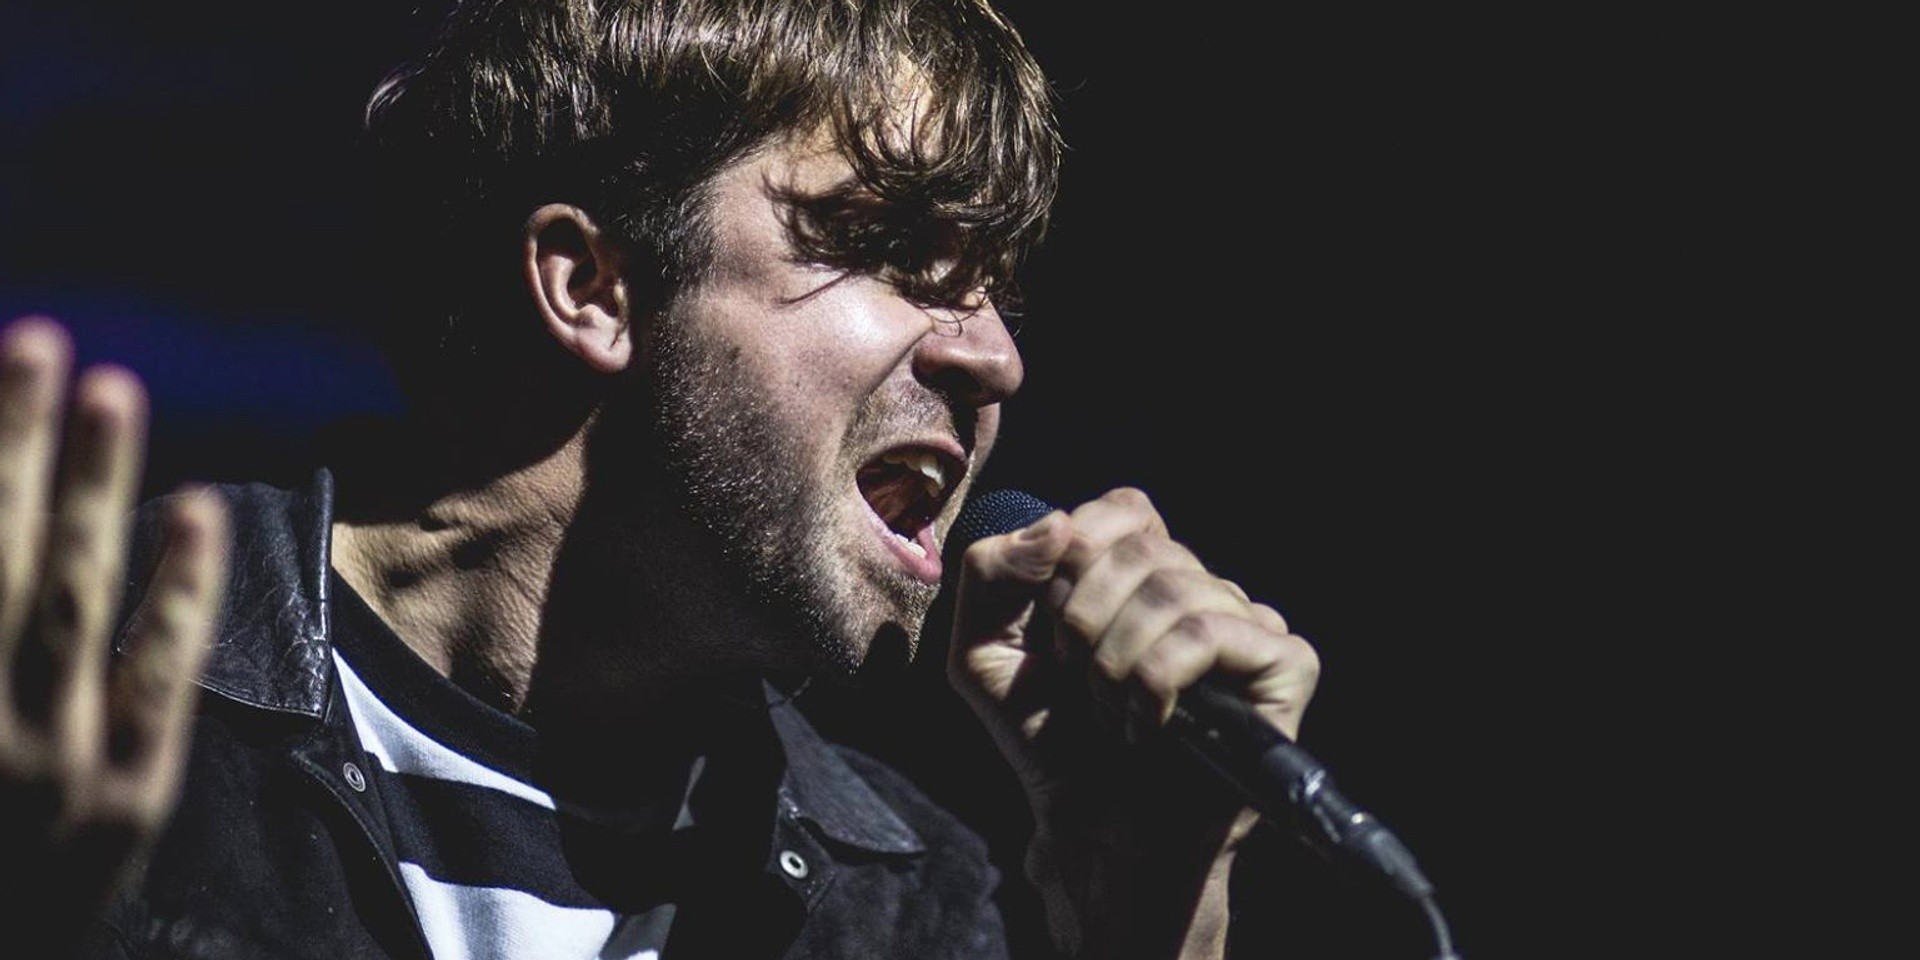 GIG REPORT: The Vaccines slay as raucous headliners in Singapore